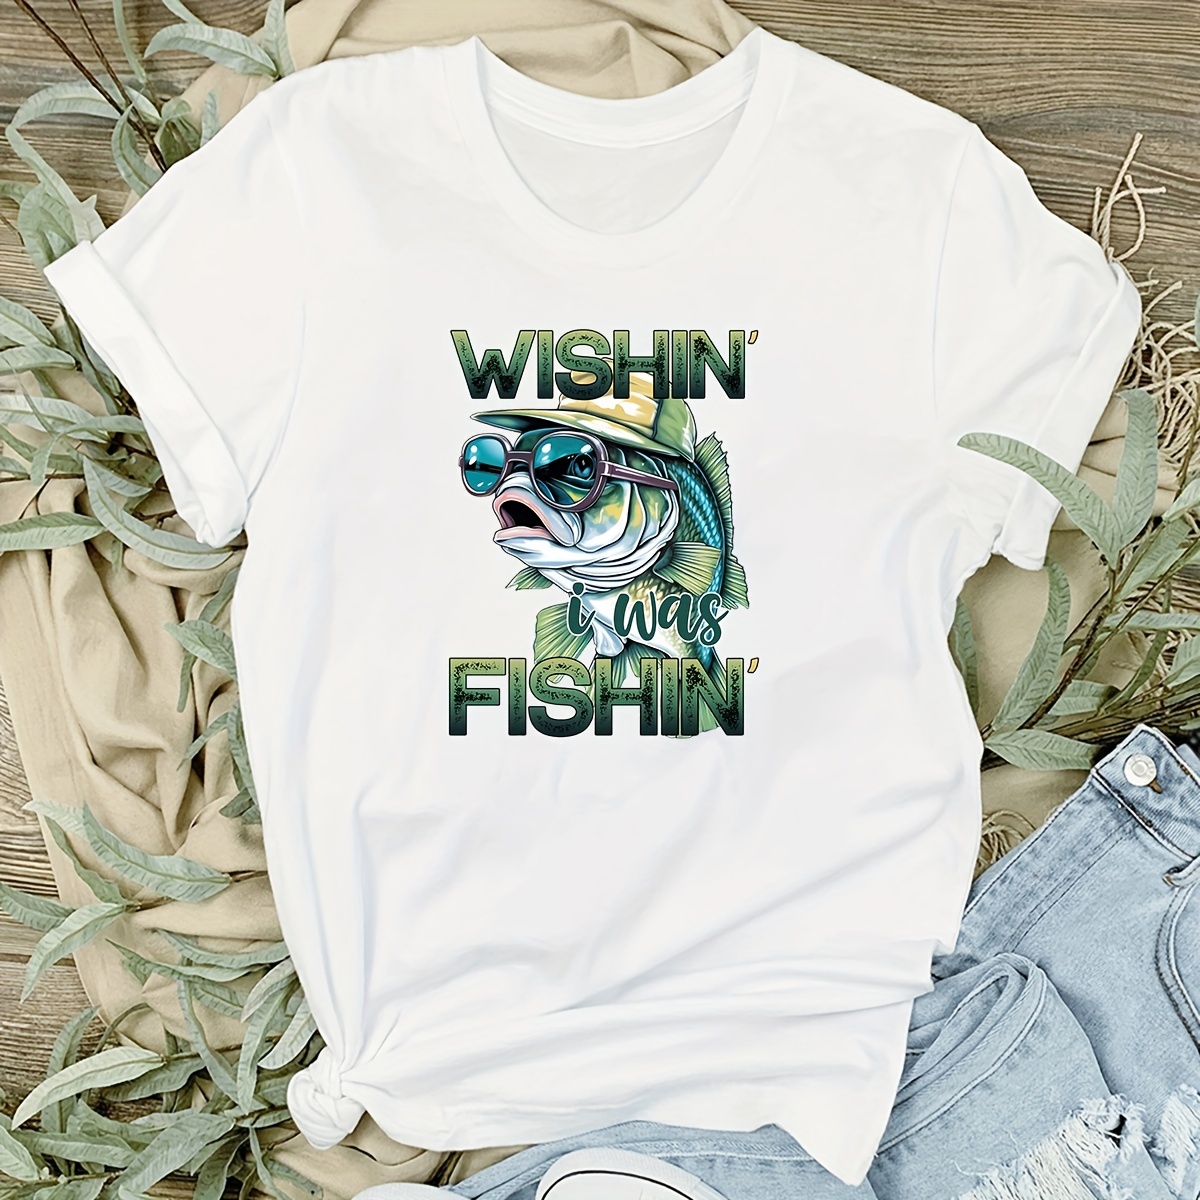 6pcs/pack Newest Funny Fishing Hobby Designs DIY Iron On Transfer Stickers  For T-shirts Jackets Jeans Heat Transfers Printing Sticker For Clothing